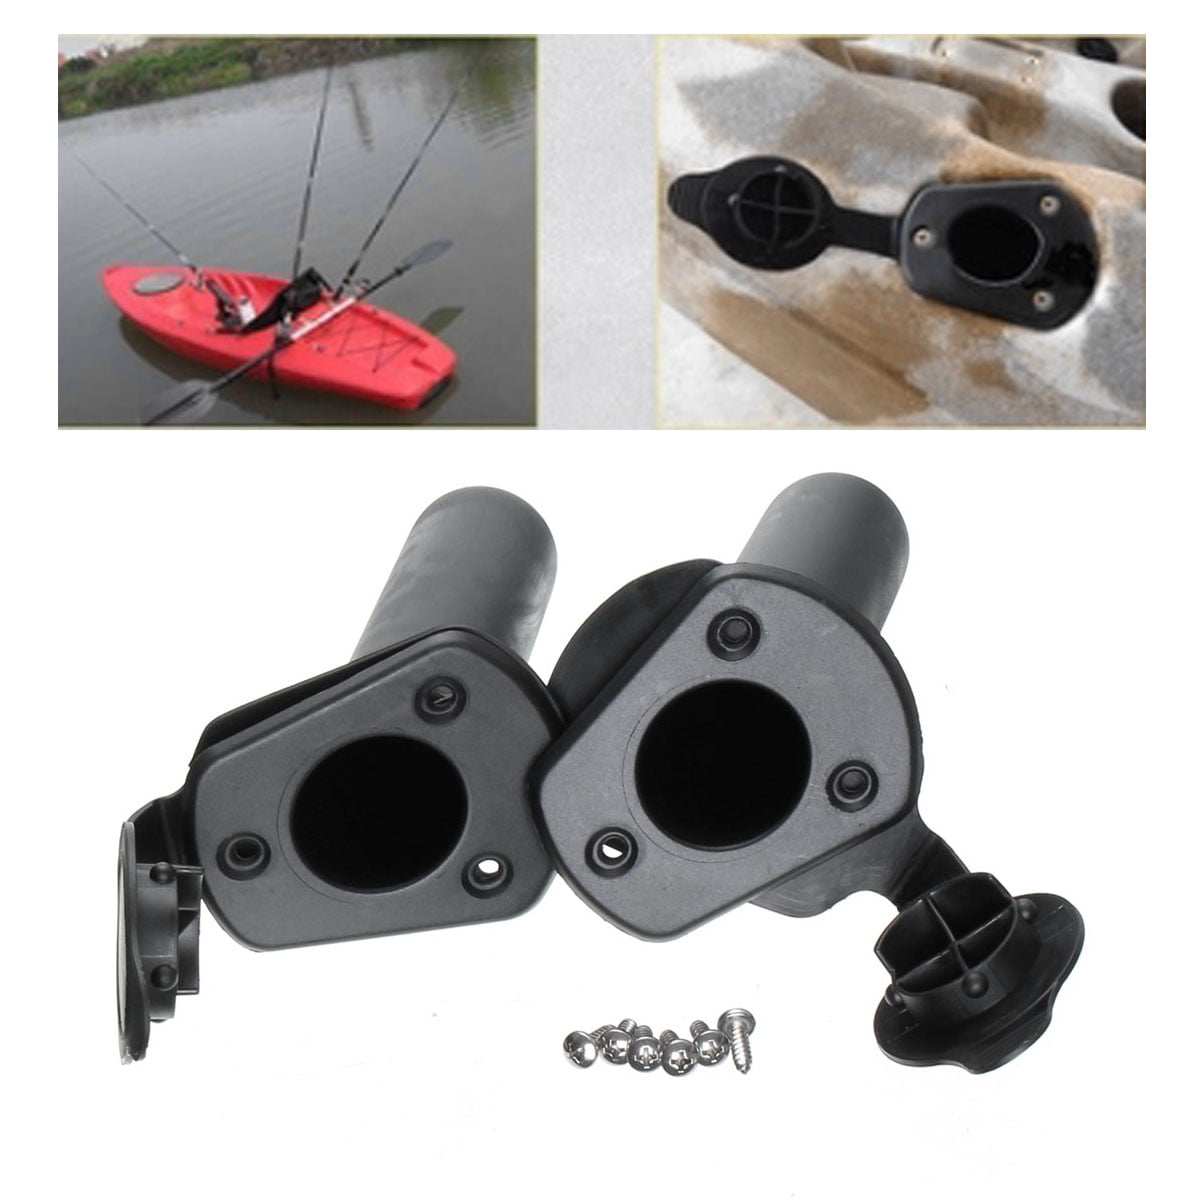 1Pair Fishing Rod Holder With Cap Gasket Flush Mount Cover For Kayak ...